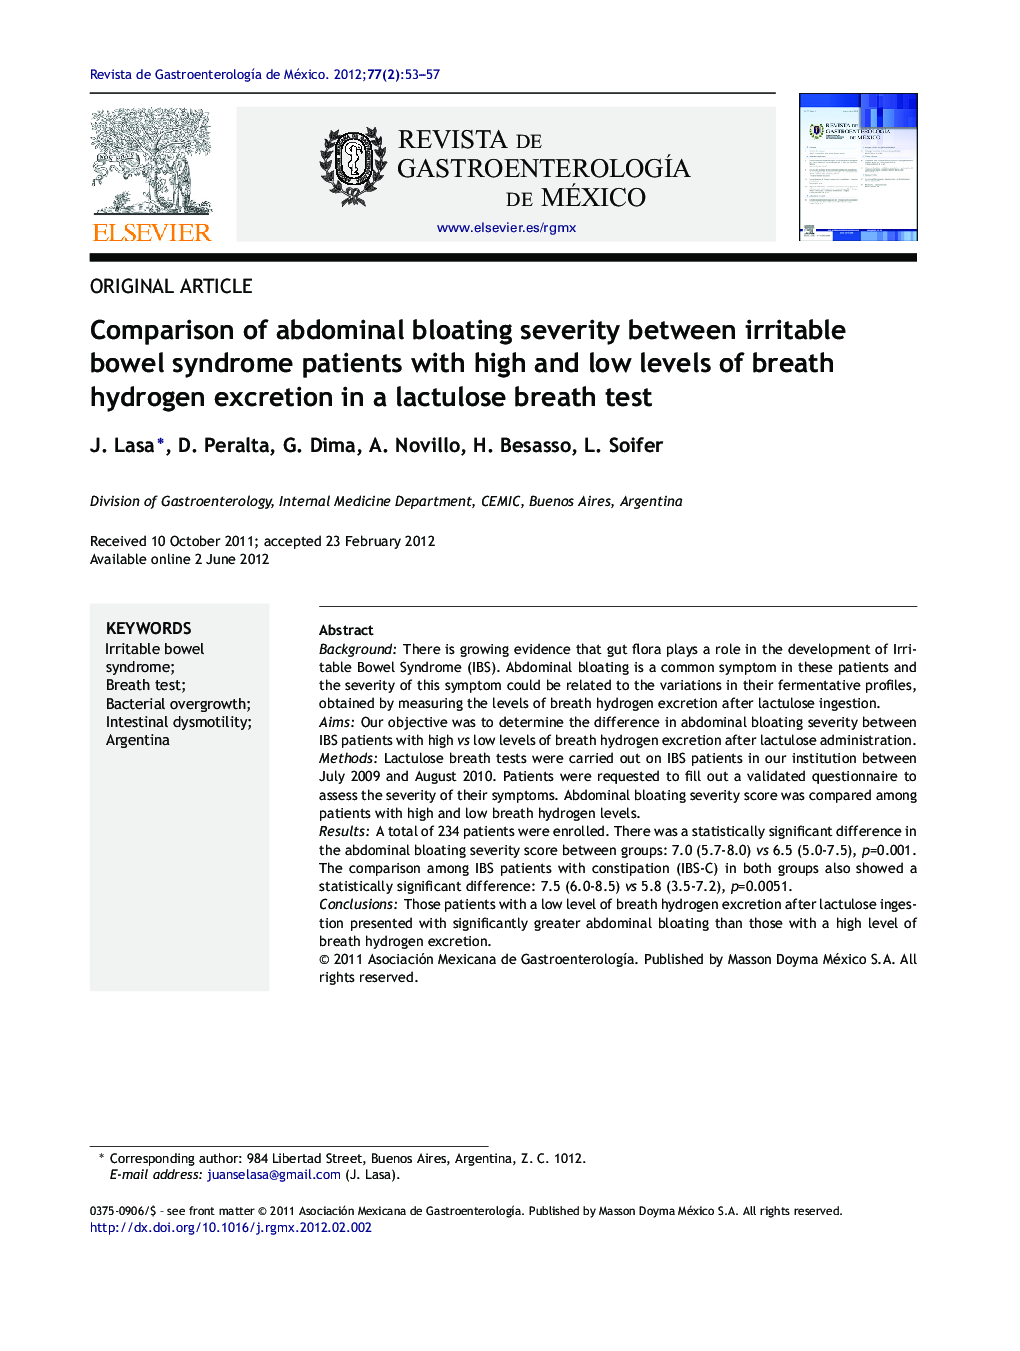 Comparison of abdominal bloating severity between irritable bowel syndrome patients with high and low levels of breath hydrogen excretion in a lactulose breath test